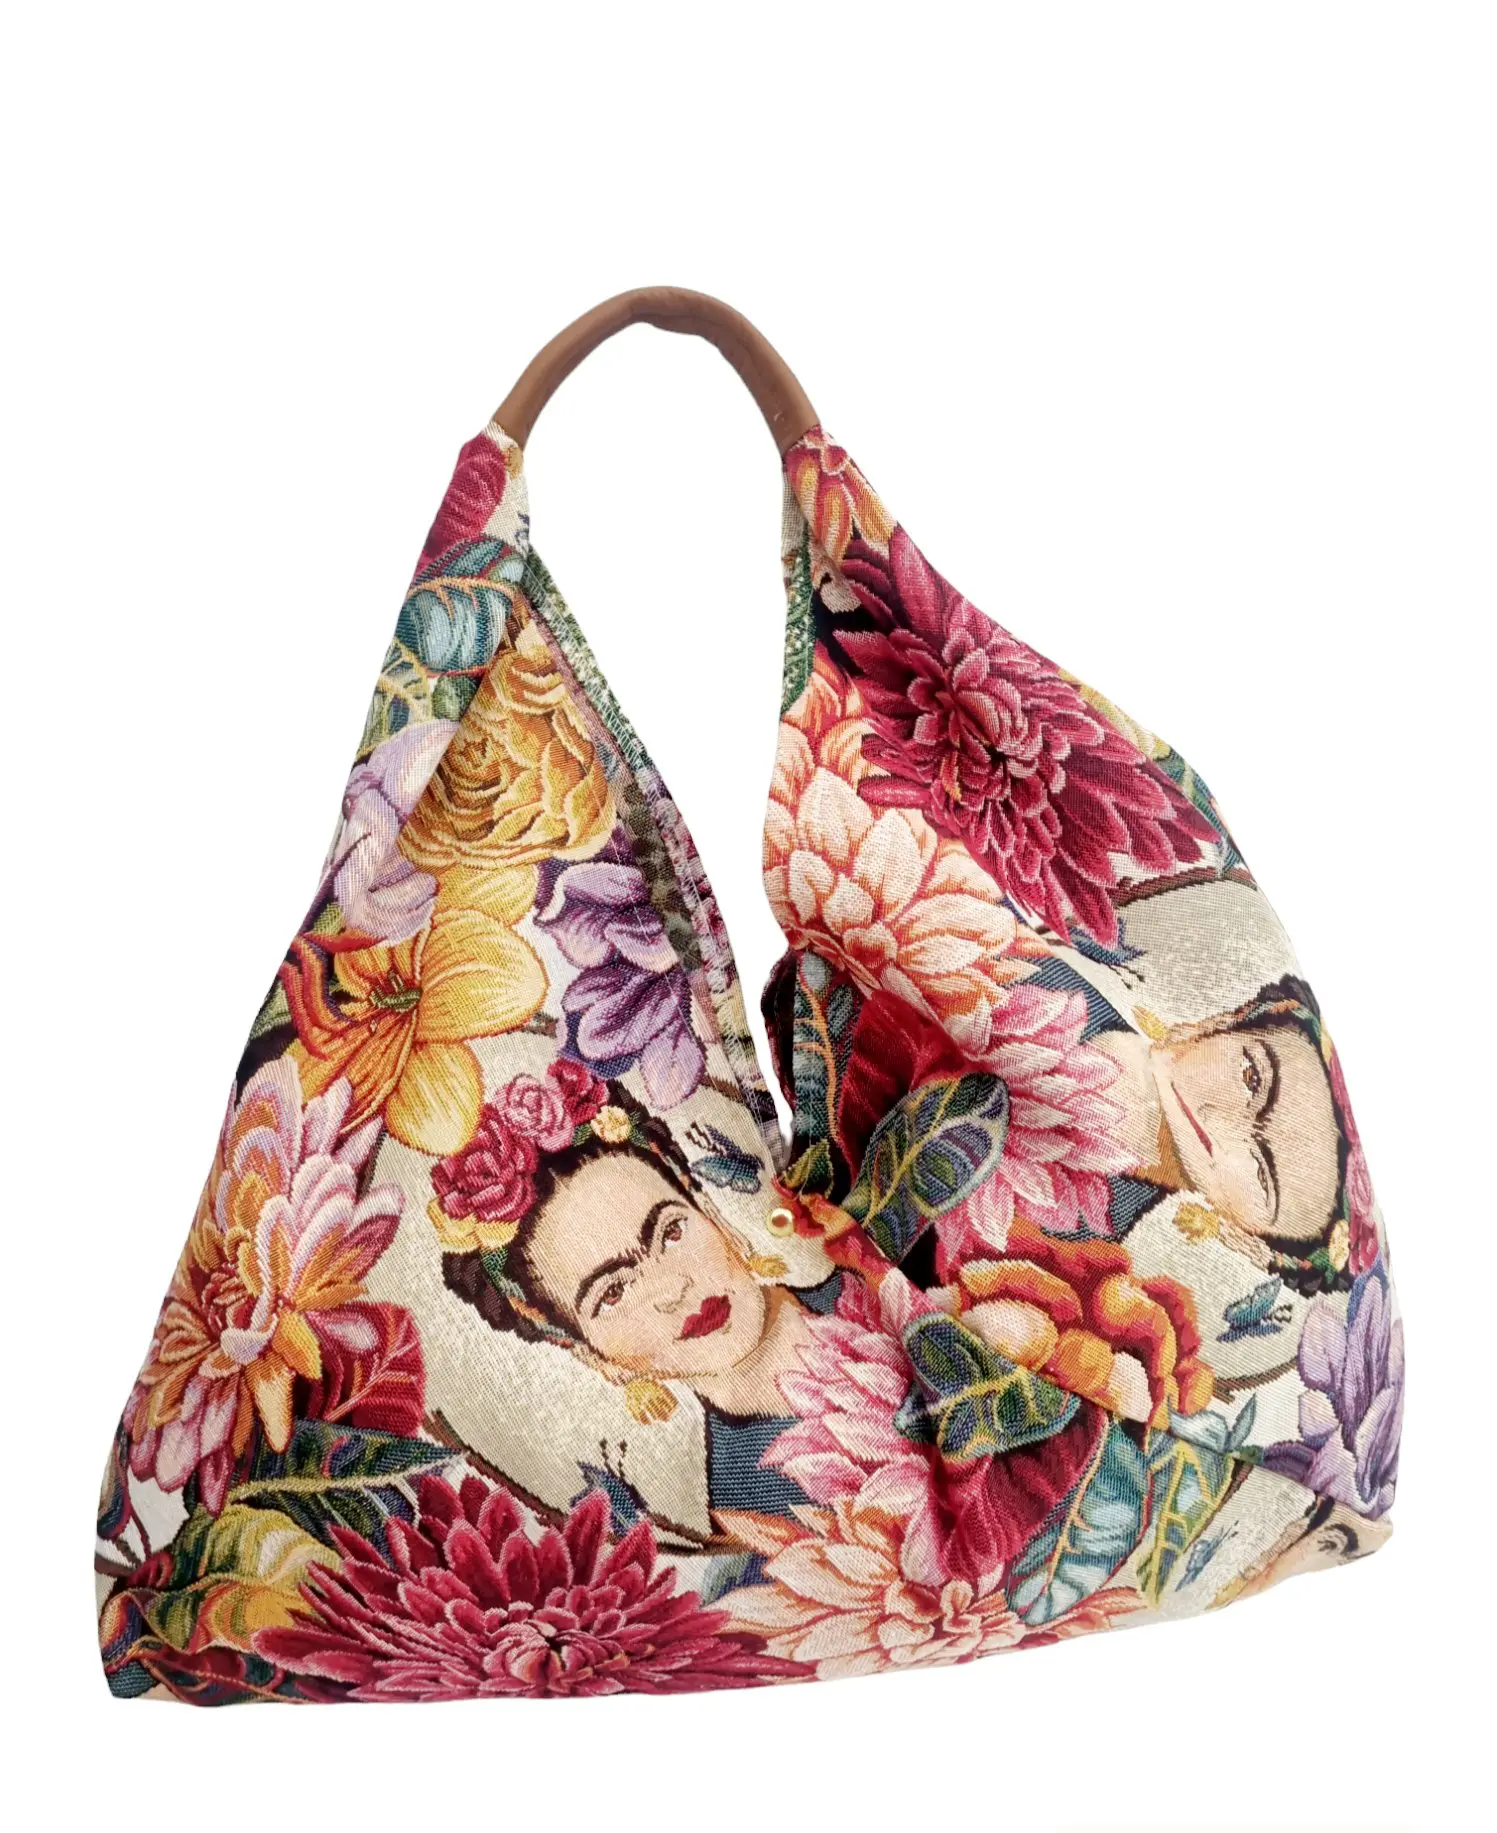 Frida fabric bag with genuine leather handle - Large size - Magnetic button closure Measurements L52 H31 Handle width 35cm